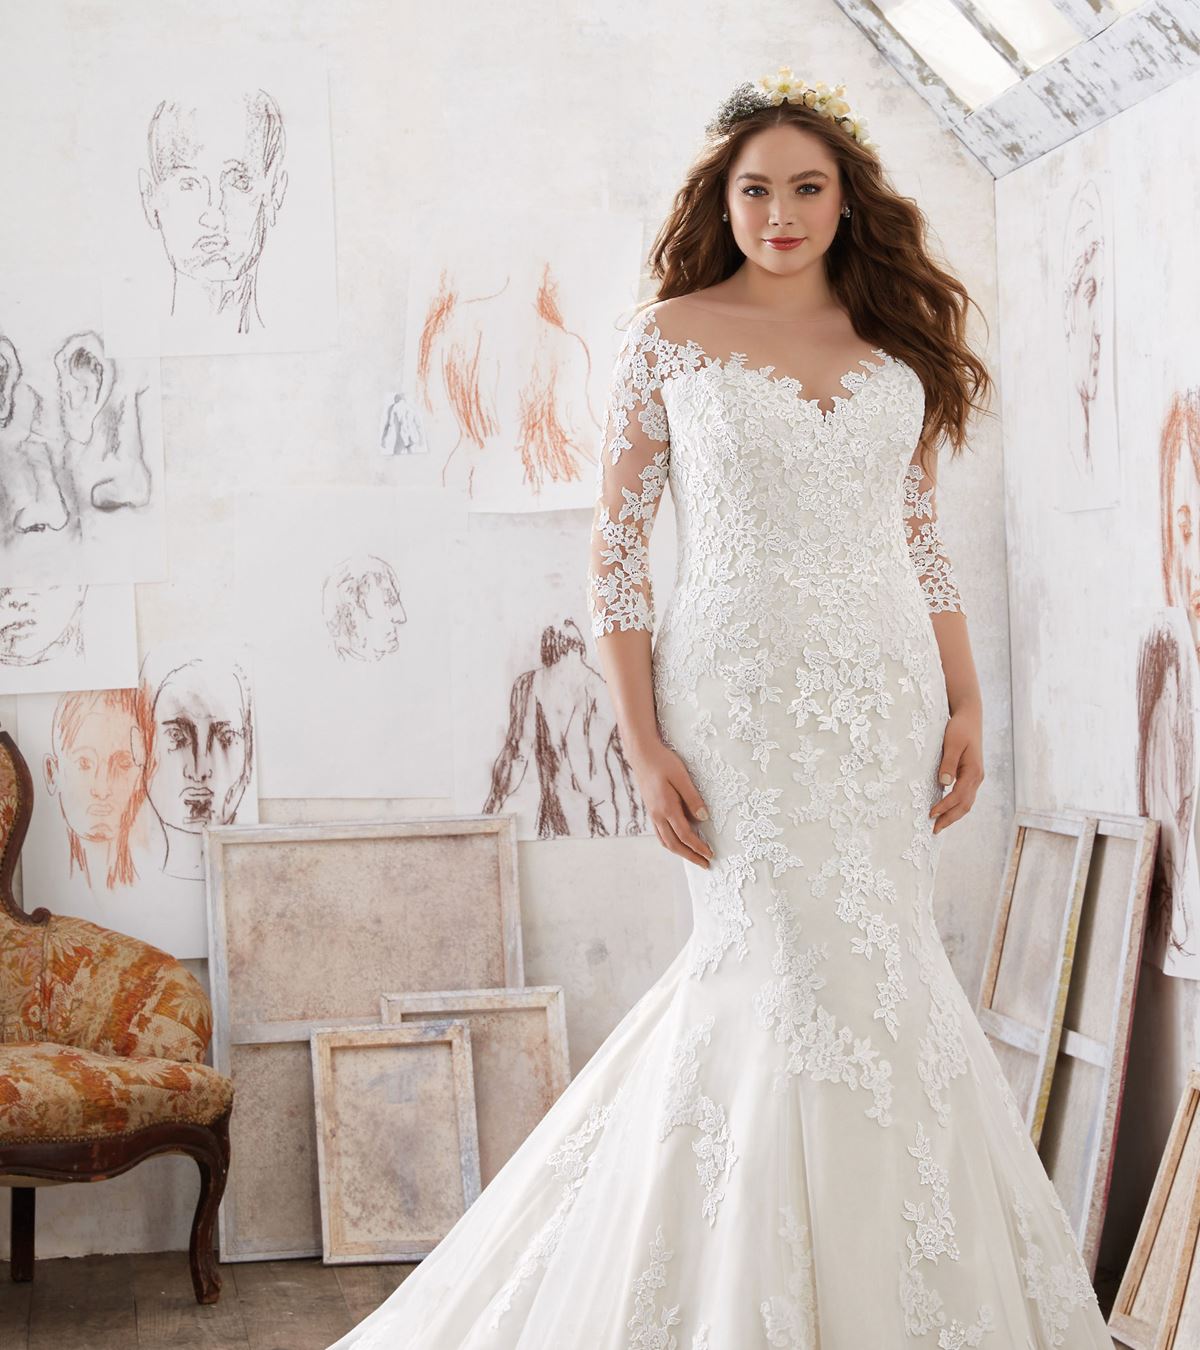 Mori lee What's the average cost of a wedding dress